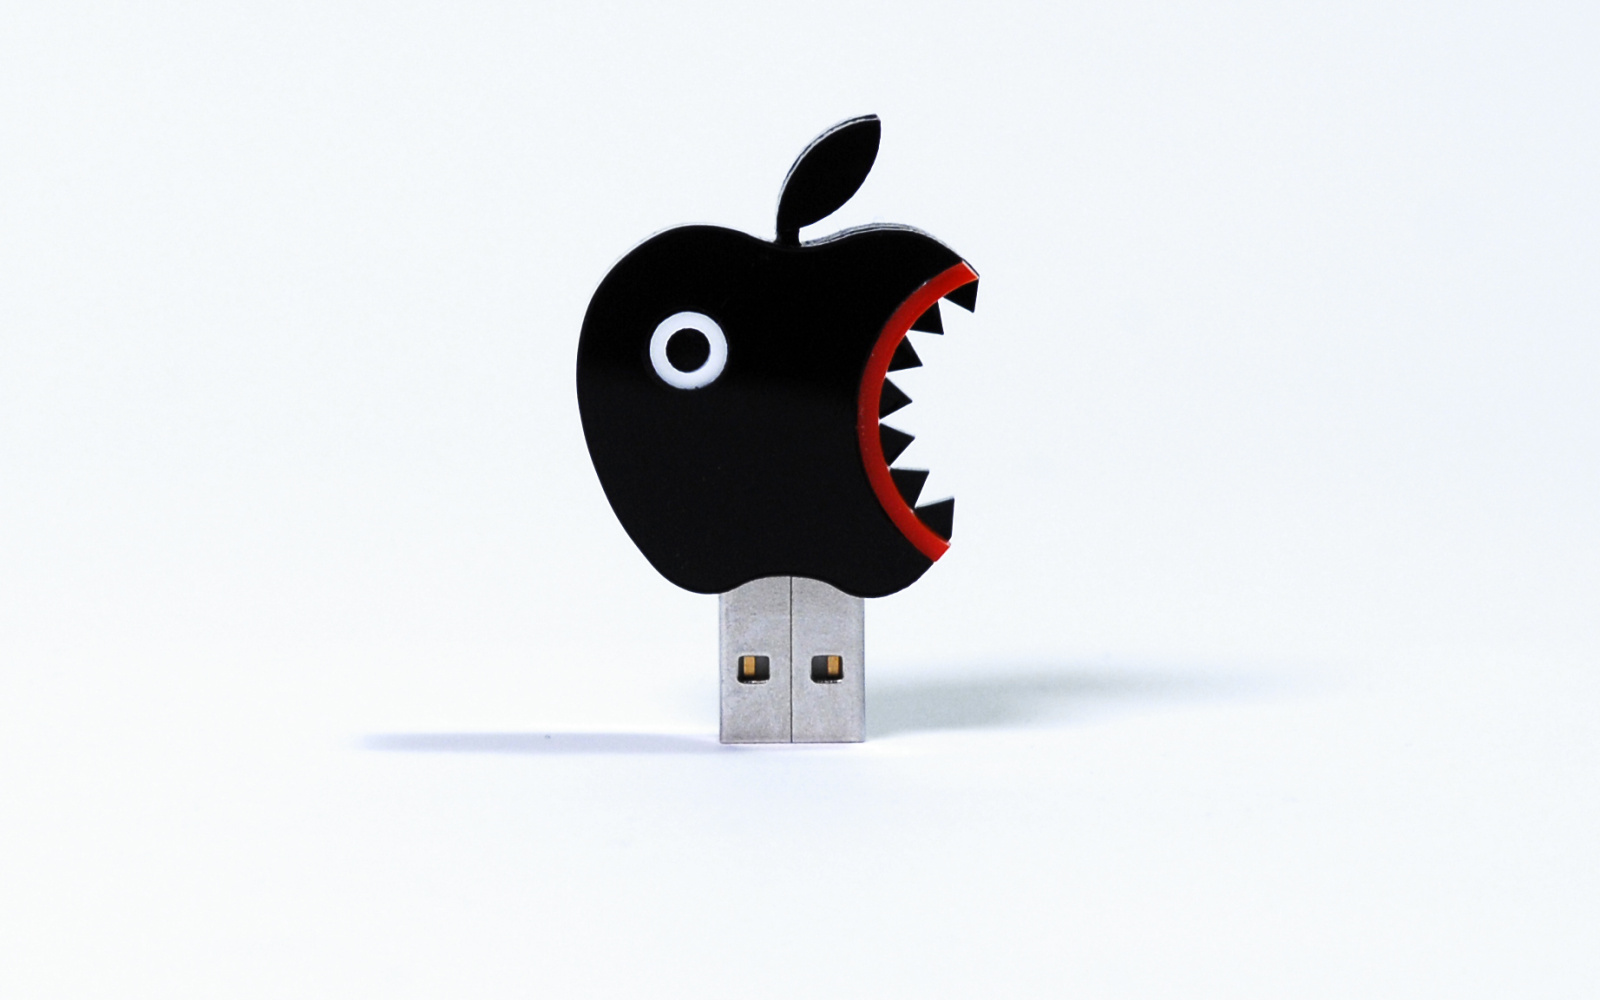 The photo shows a USB stick in the form of a black PacMan-like apple icon.